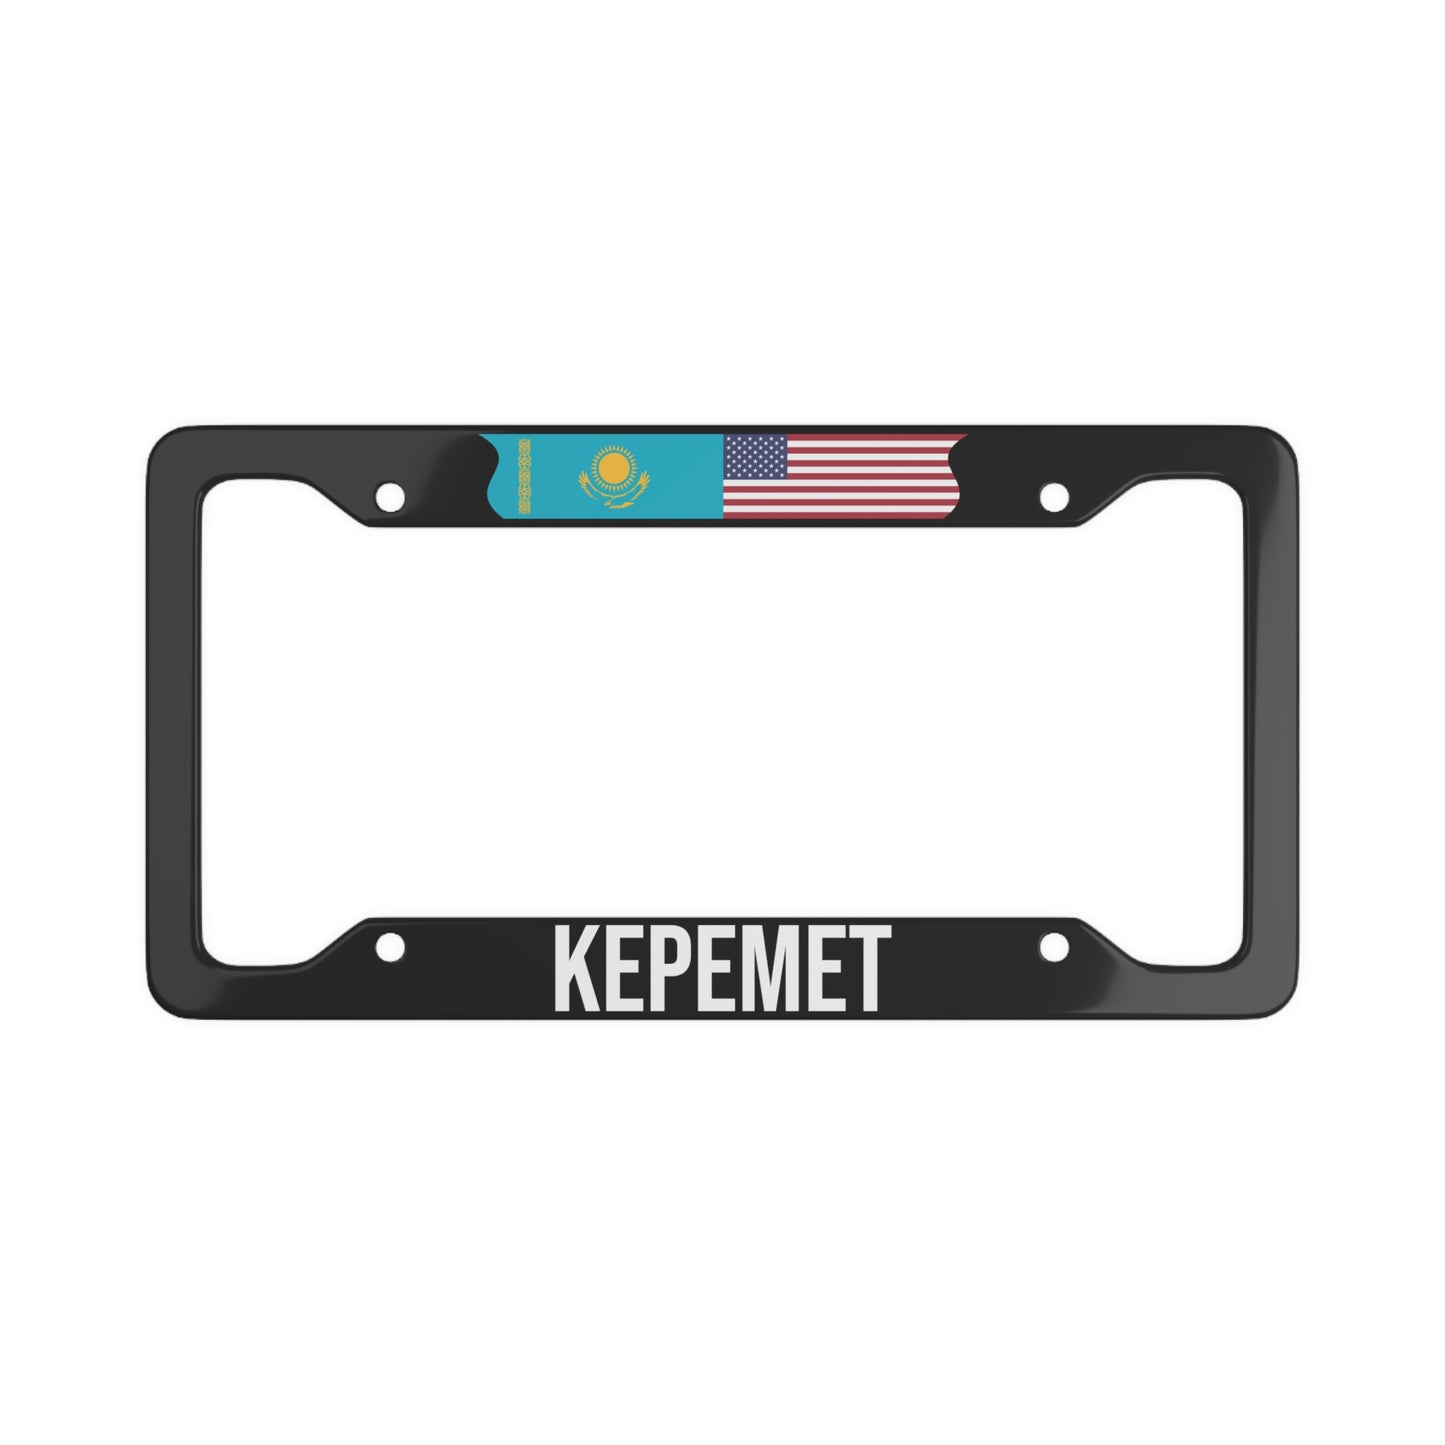 KEPEMET KZ with flag License Plate Frame